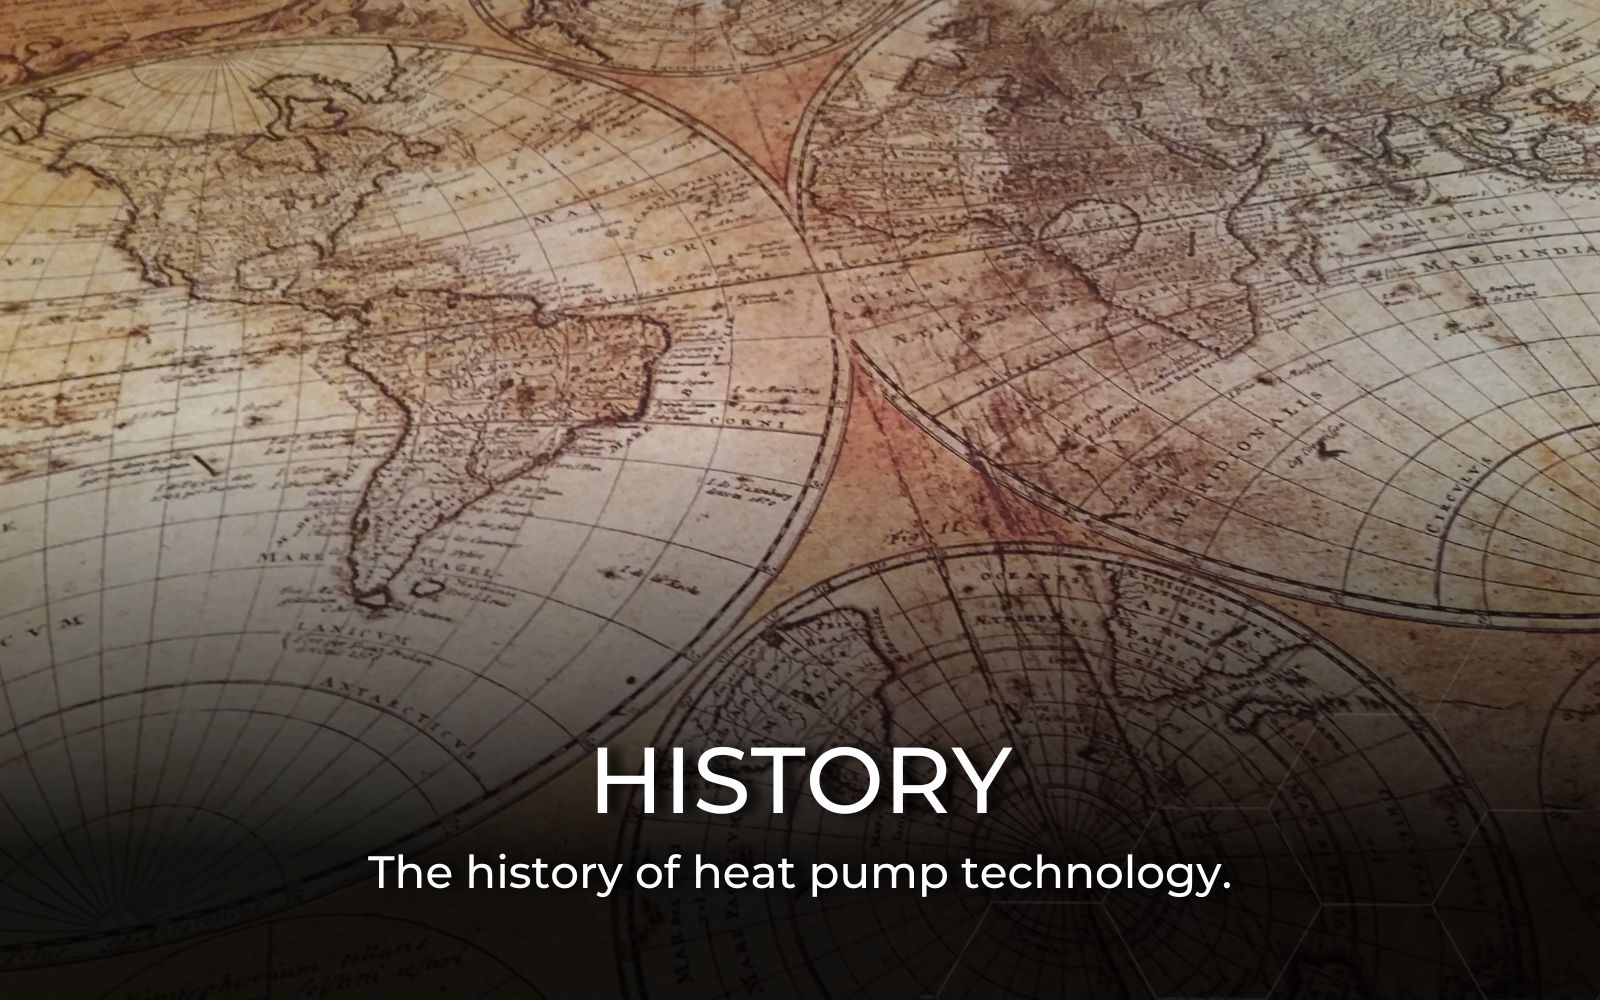 The history of heat pump technology